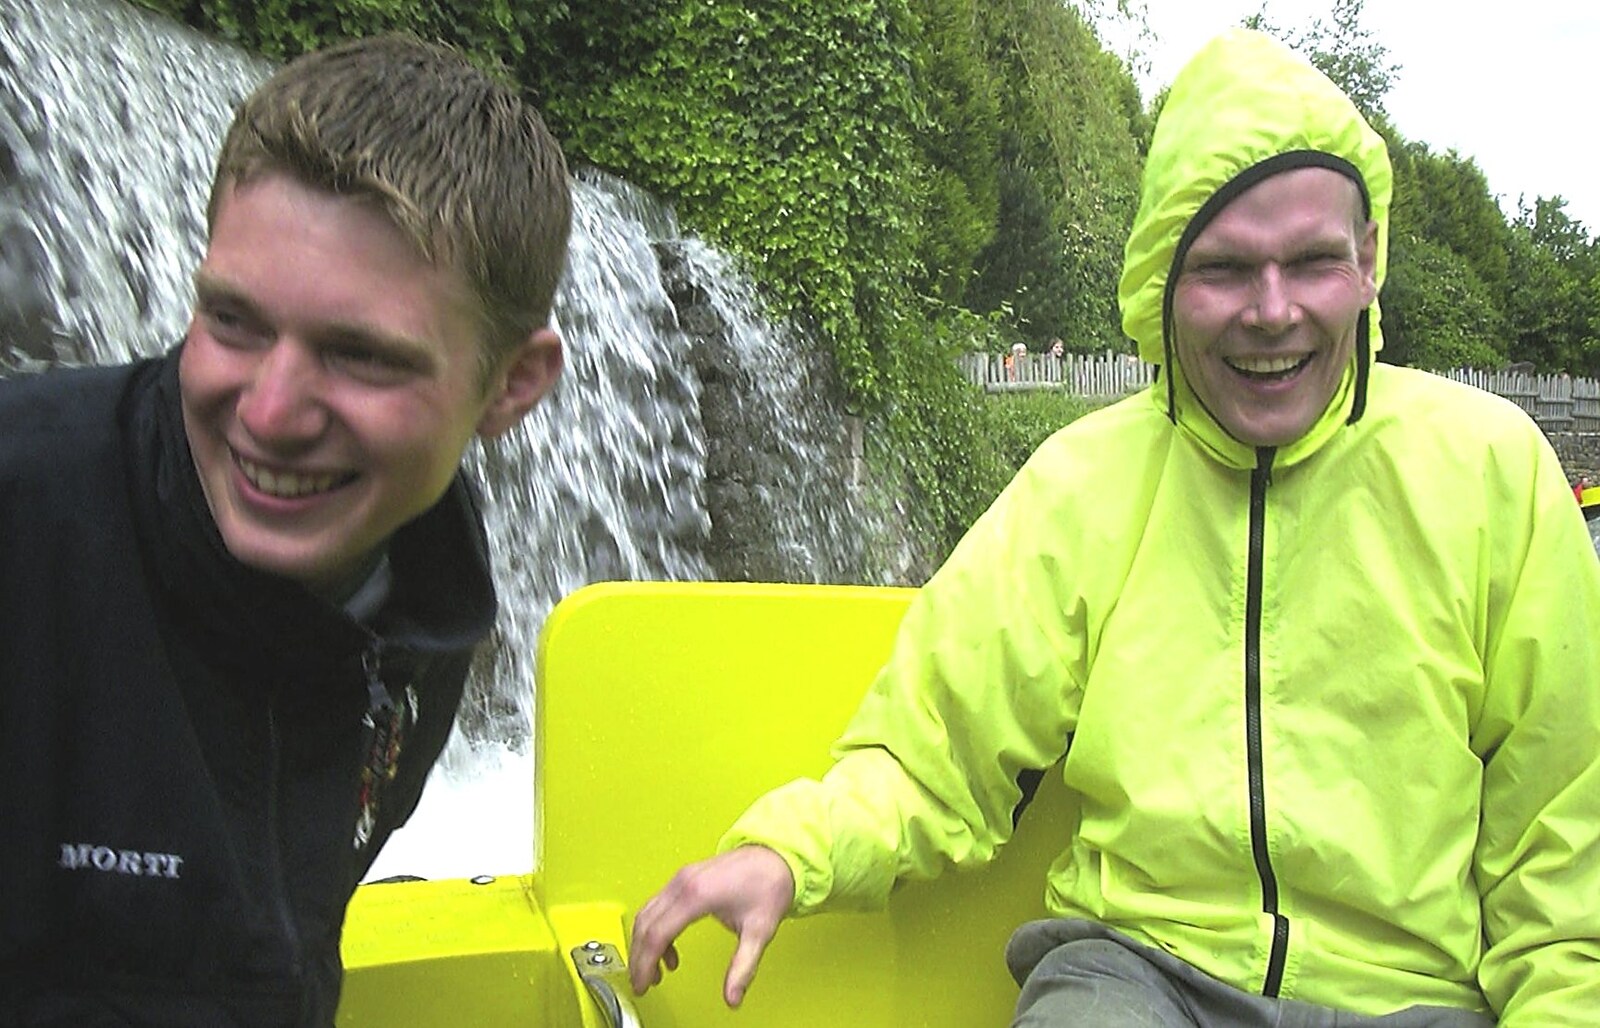 A Trip to Alton Towers, Staffordshire - 19th June 2004: Phil and Bill